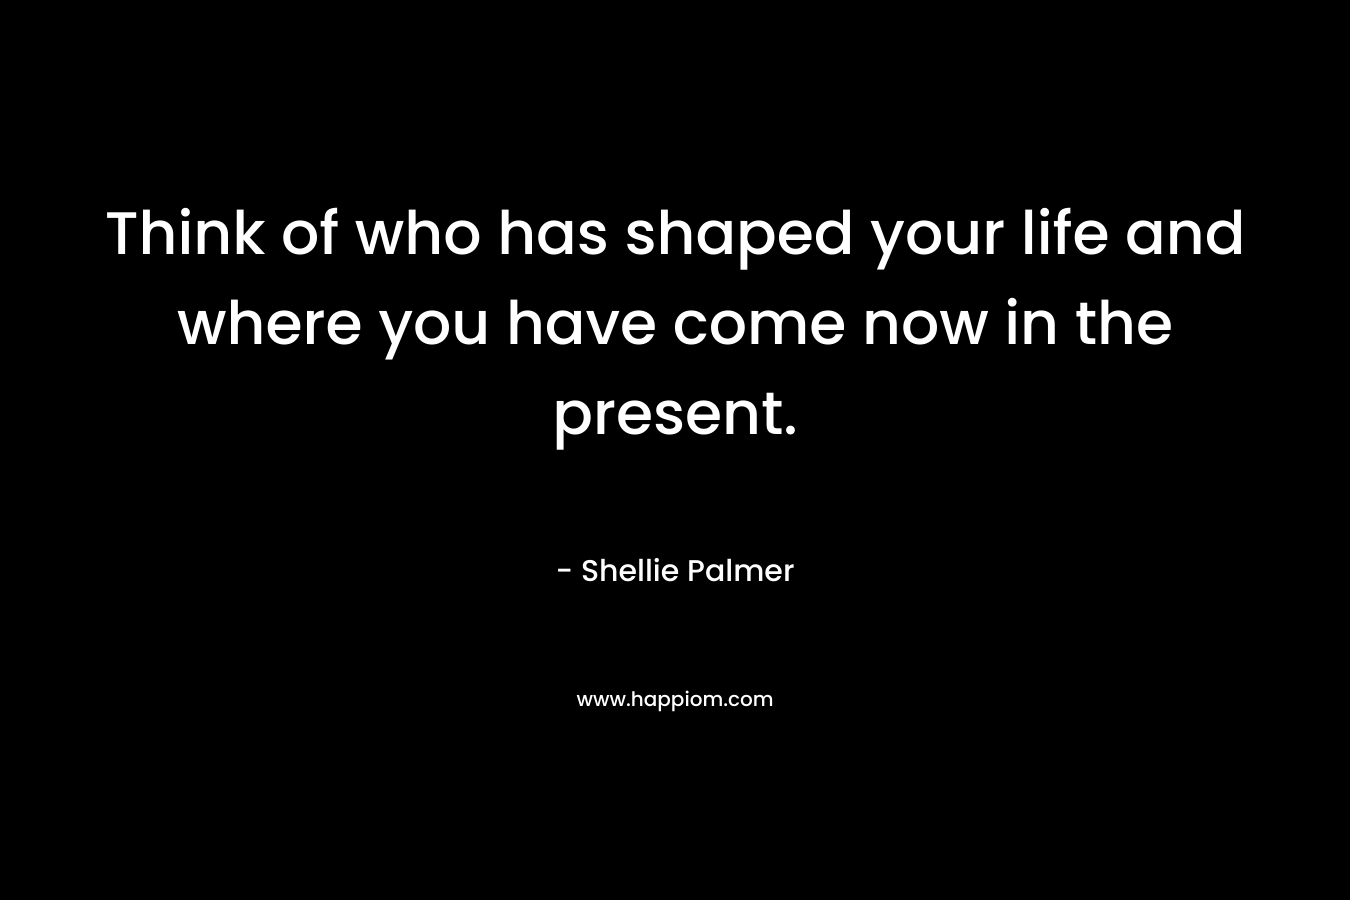 Think of who has shaped your life and where you have come now in the present. – Shellie Palmer